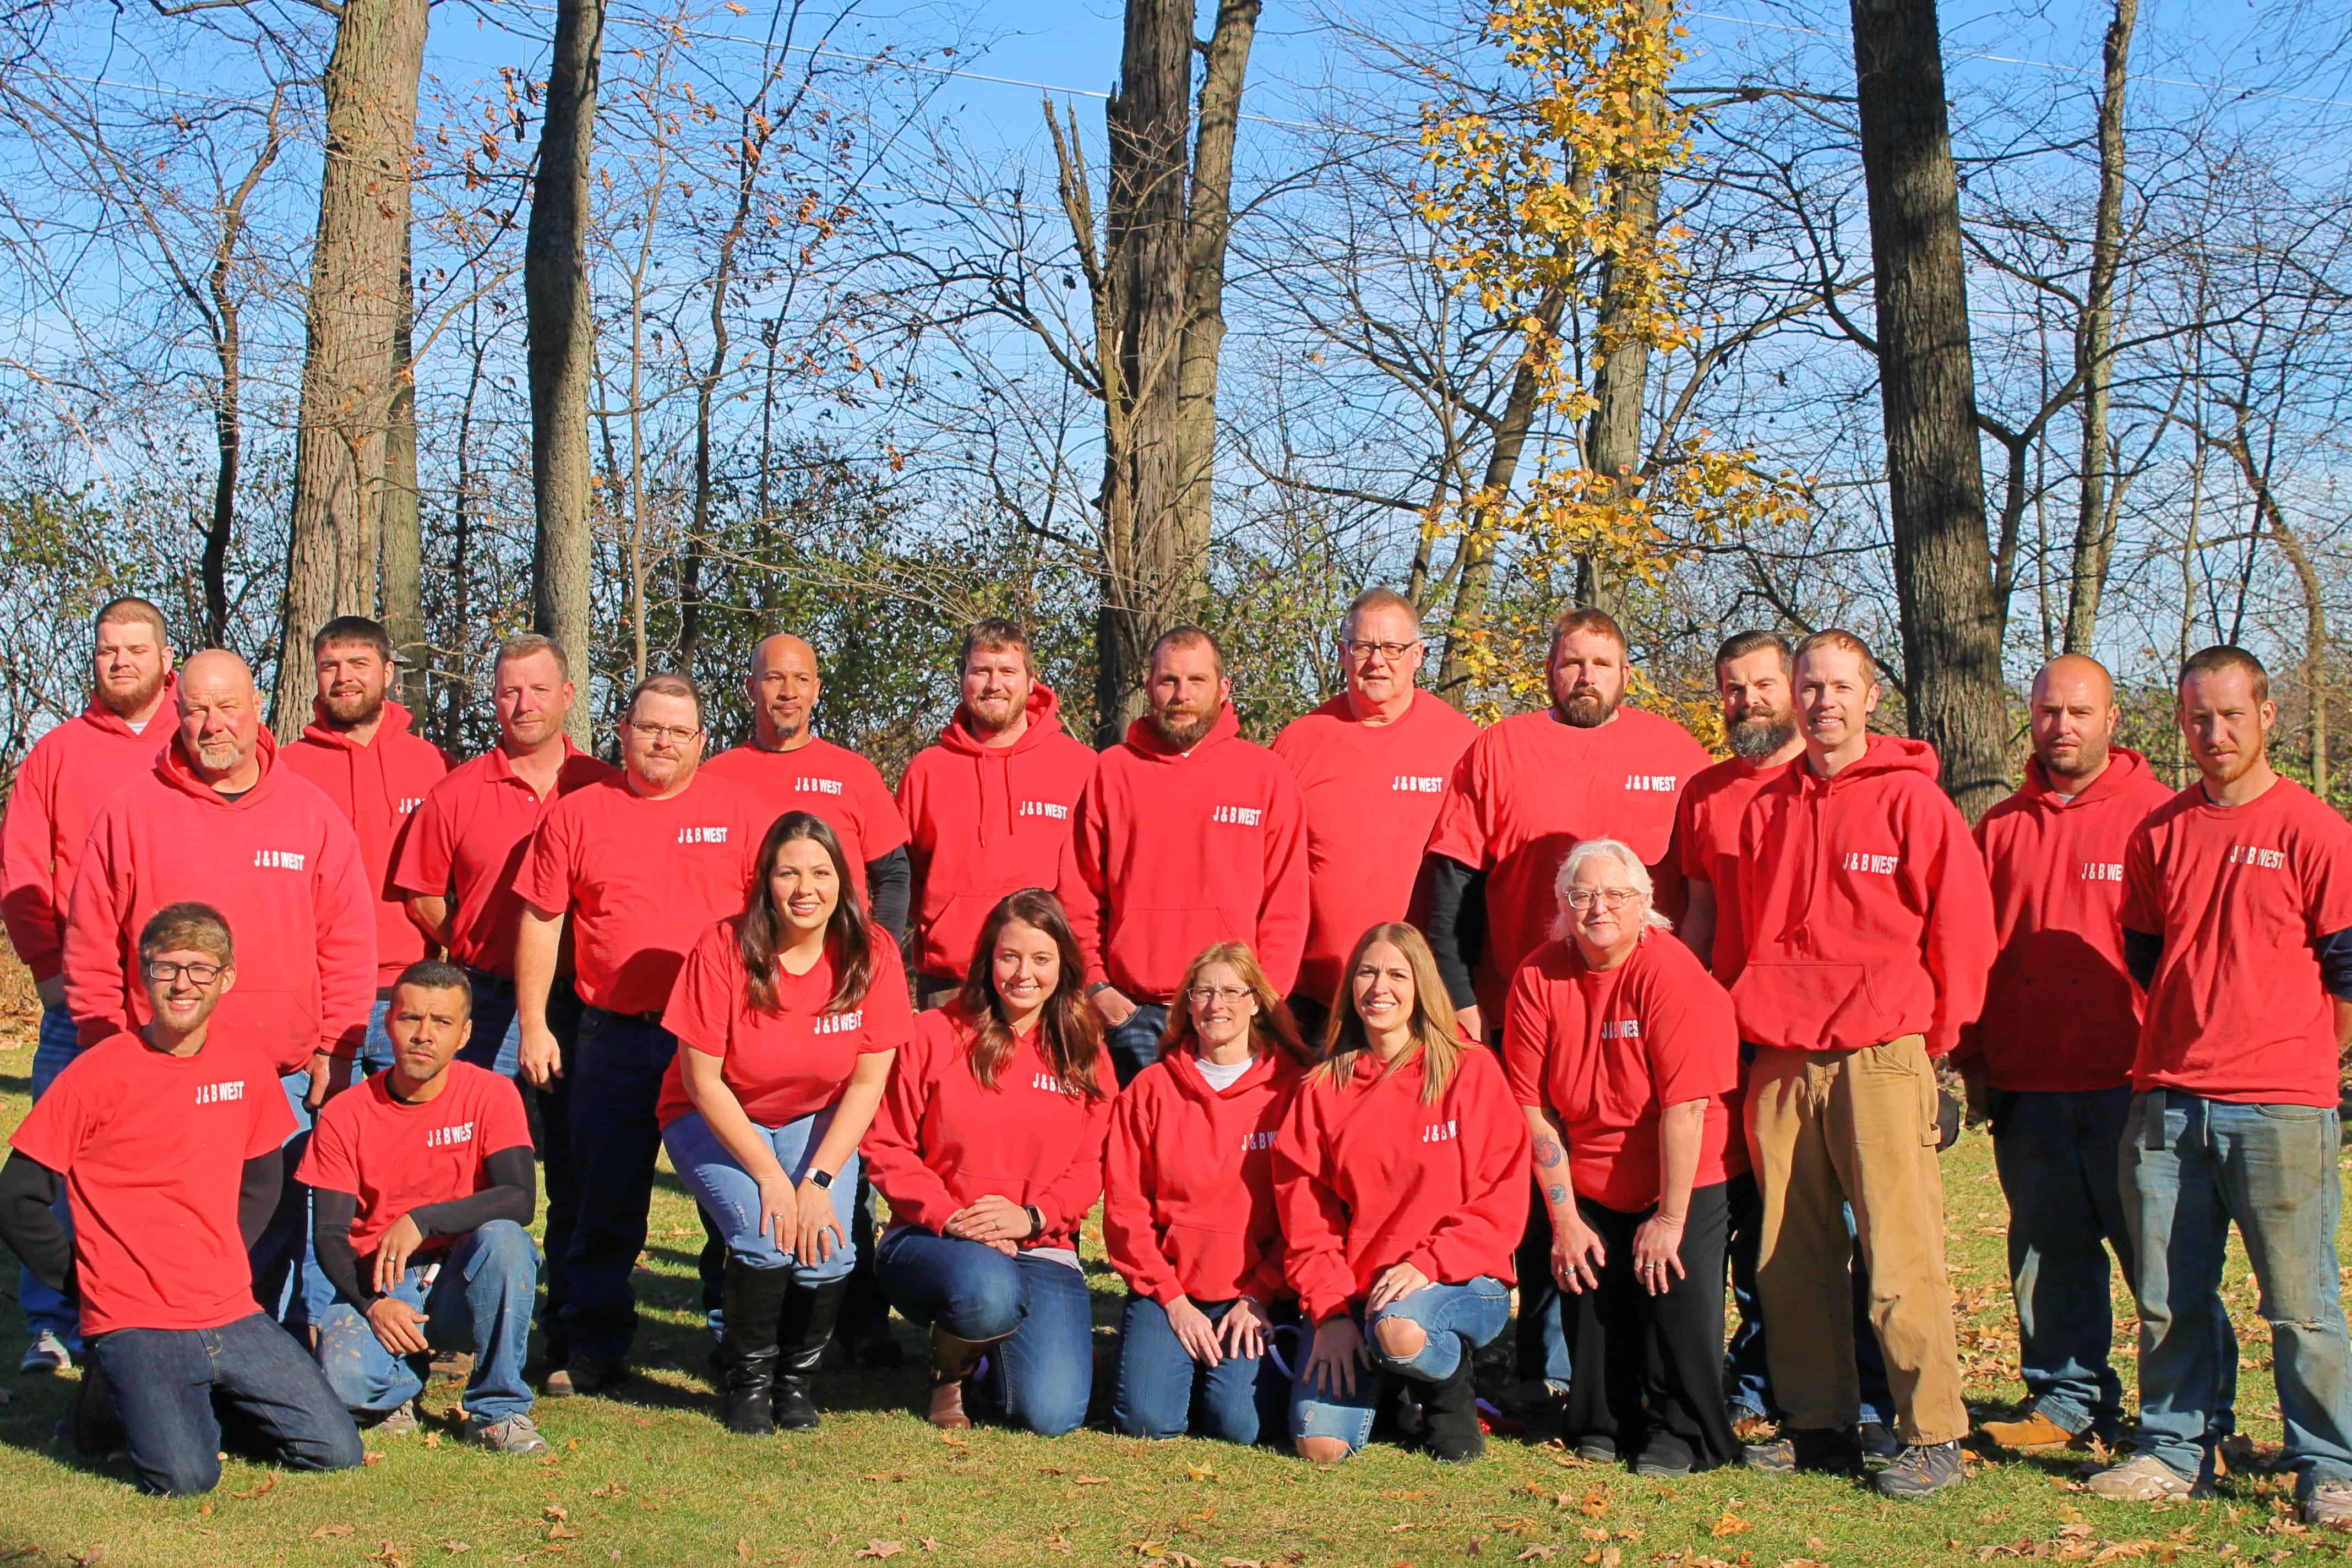 The J&amp;B West roofing contractor team.